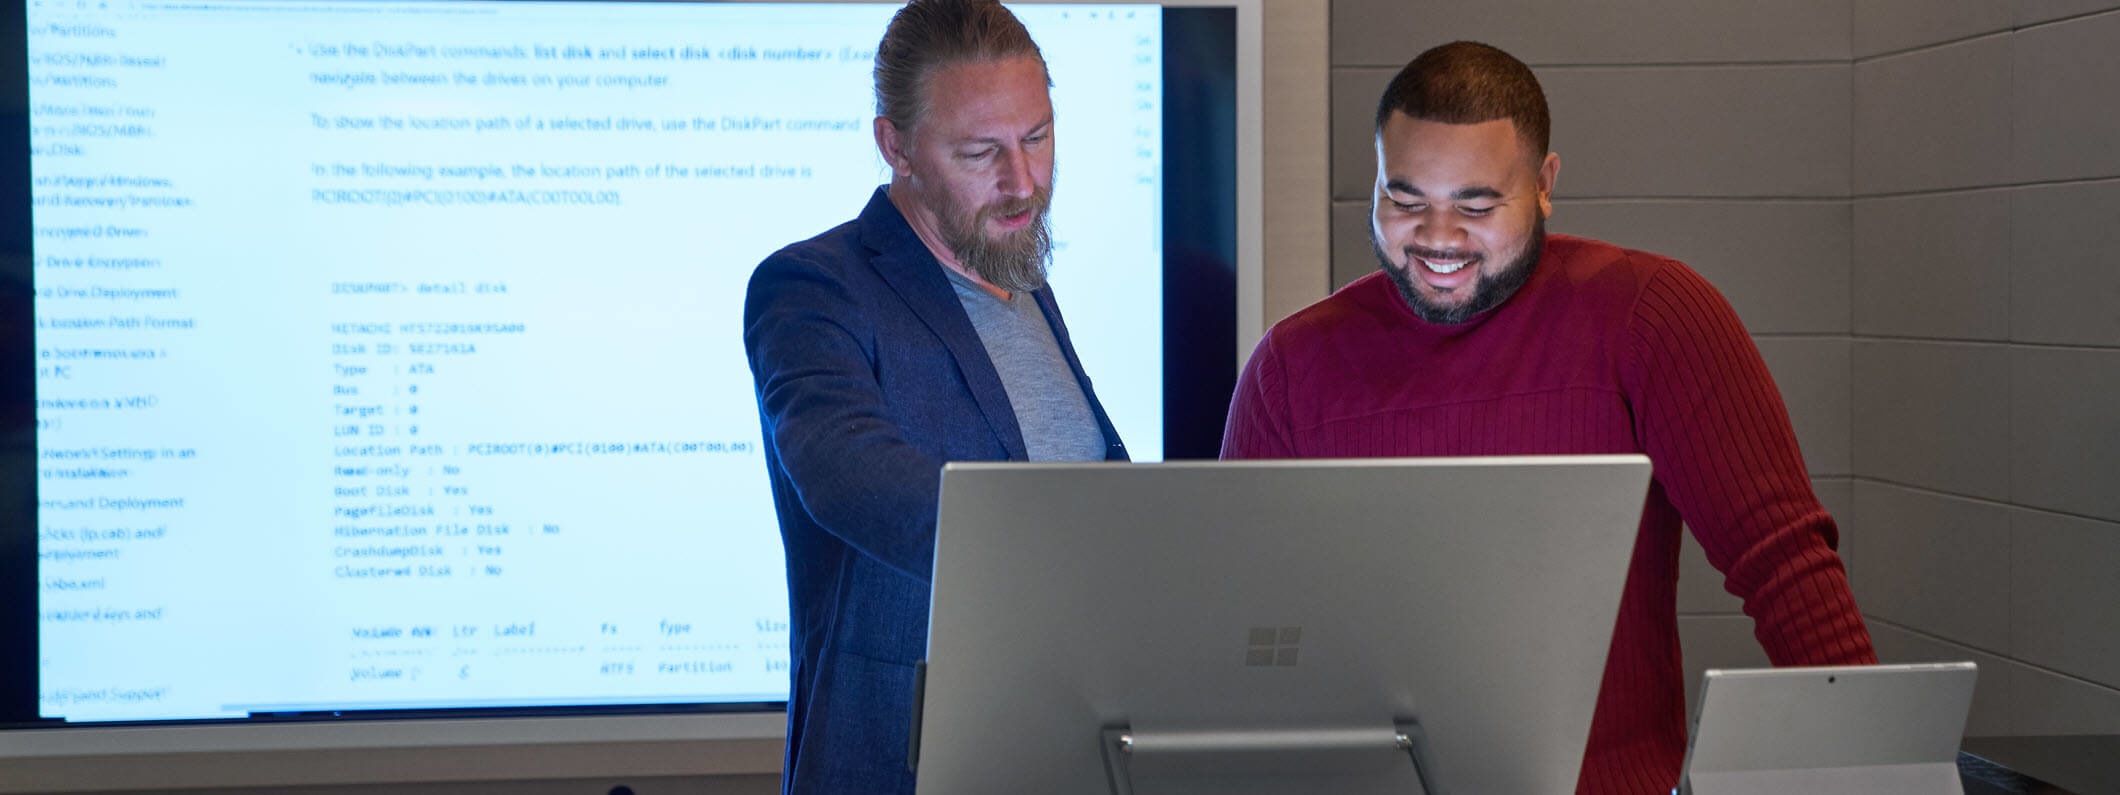 Forward facing view of two men working on a Microsoft Surface Studio with a larger blurred screen/display behind them.